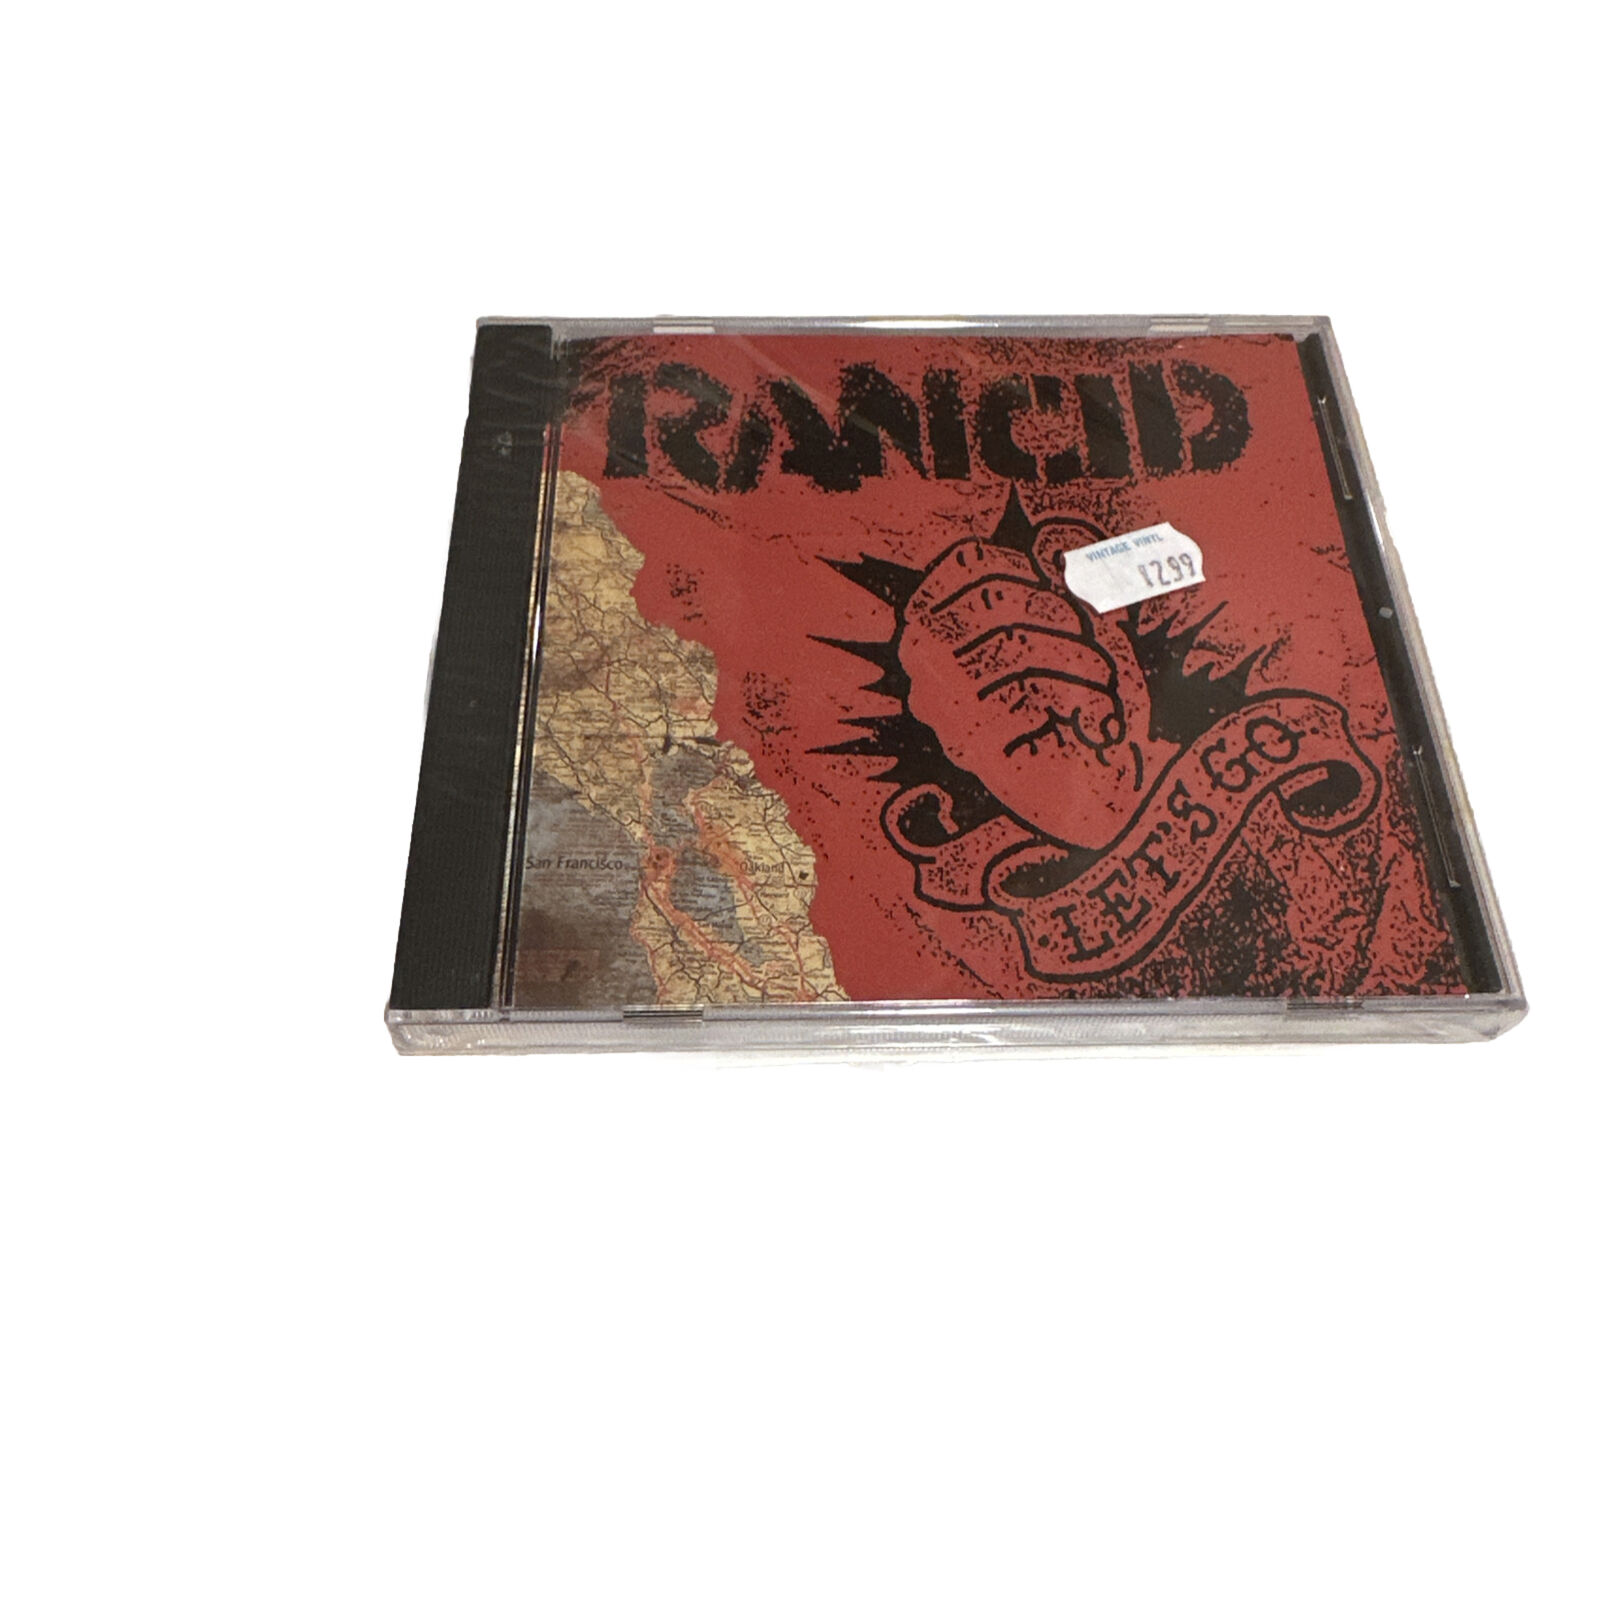 Let's Go by Rancid (CD, 1994)